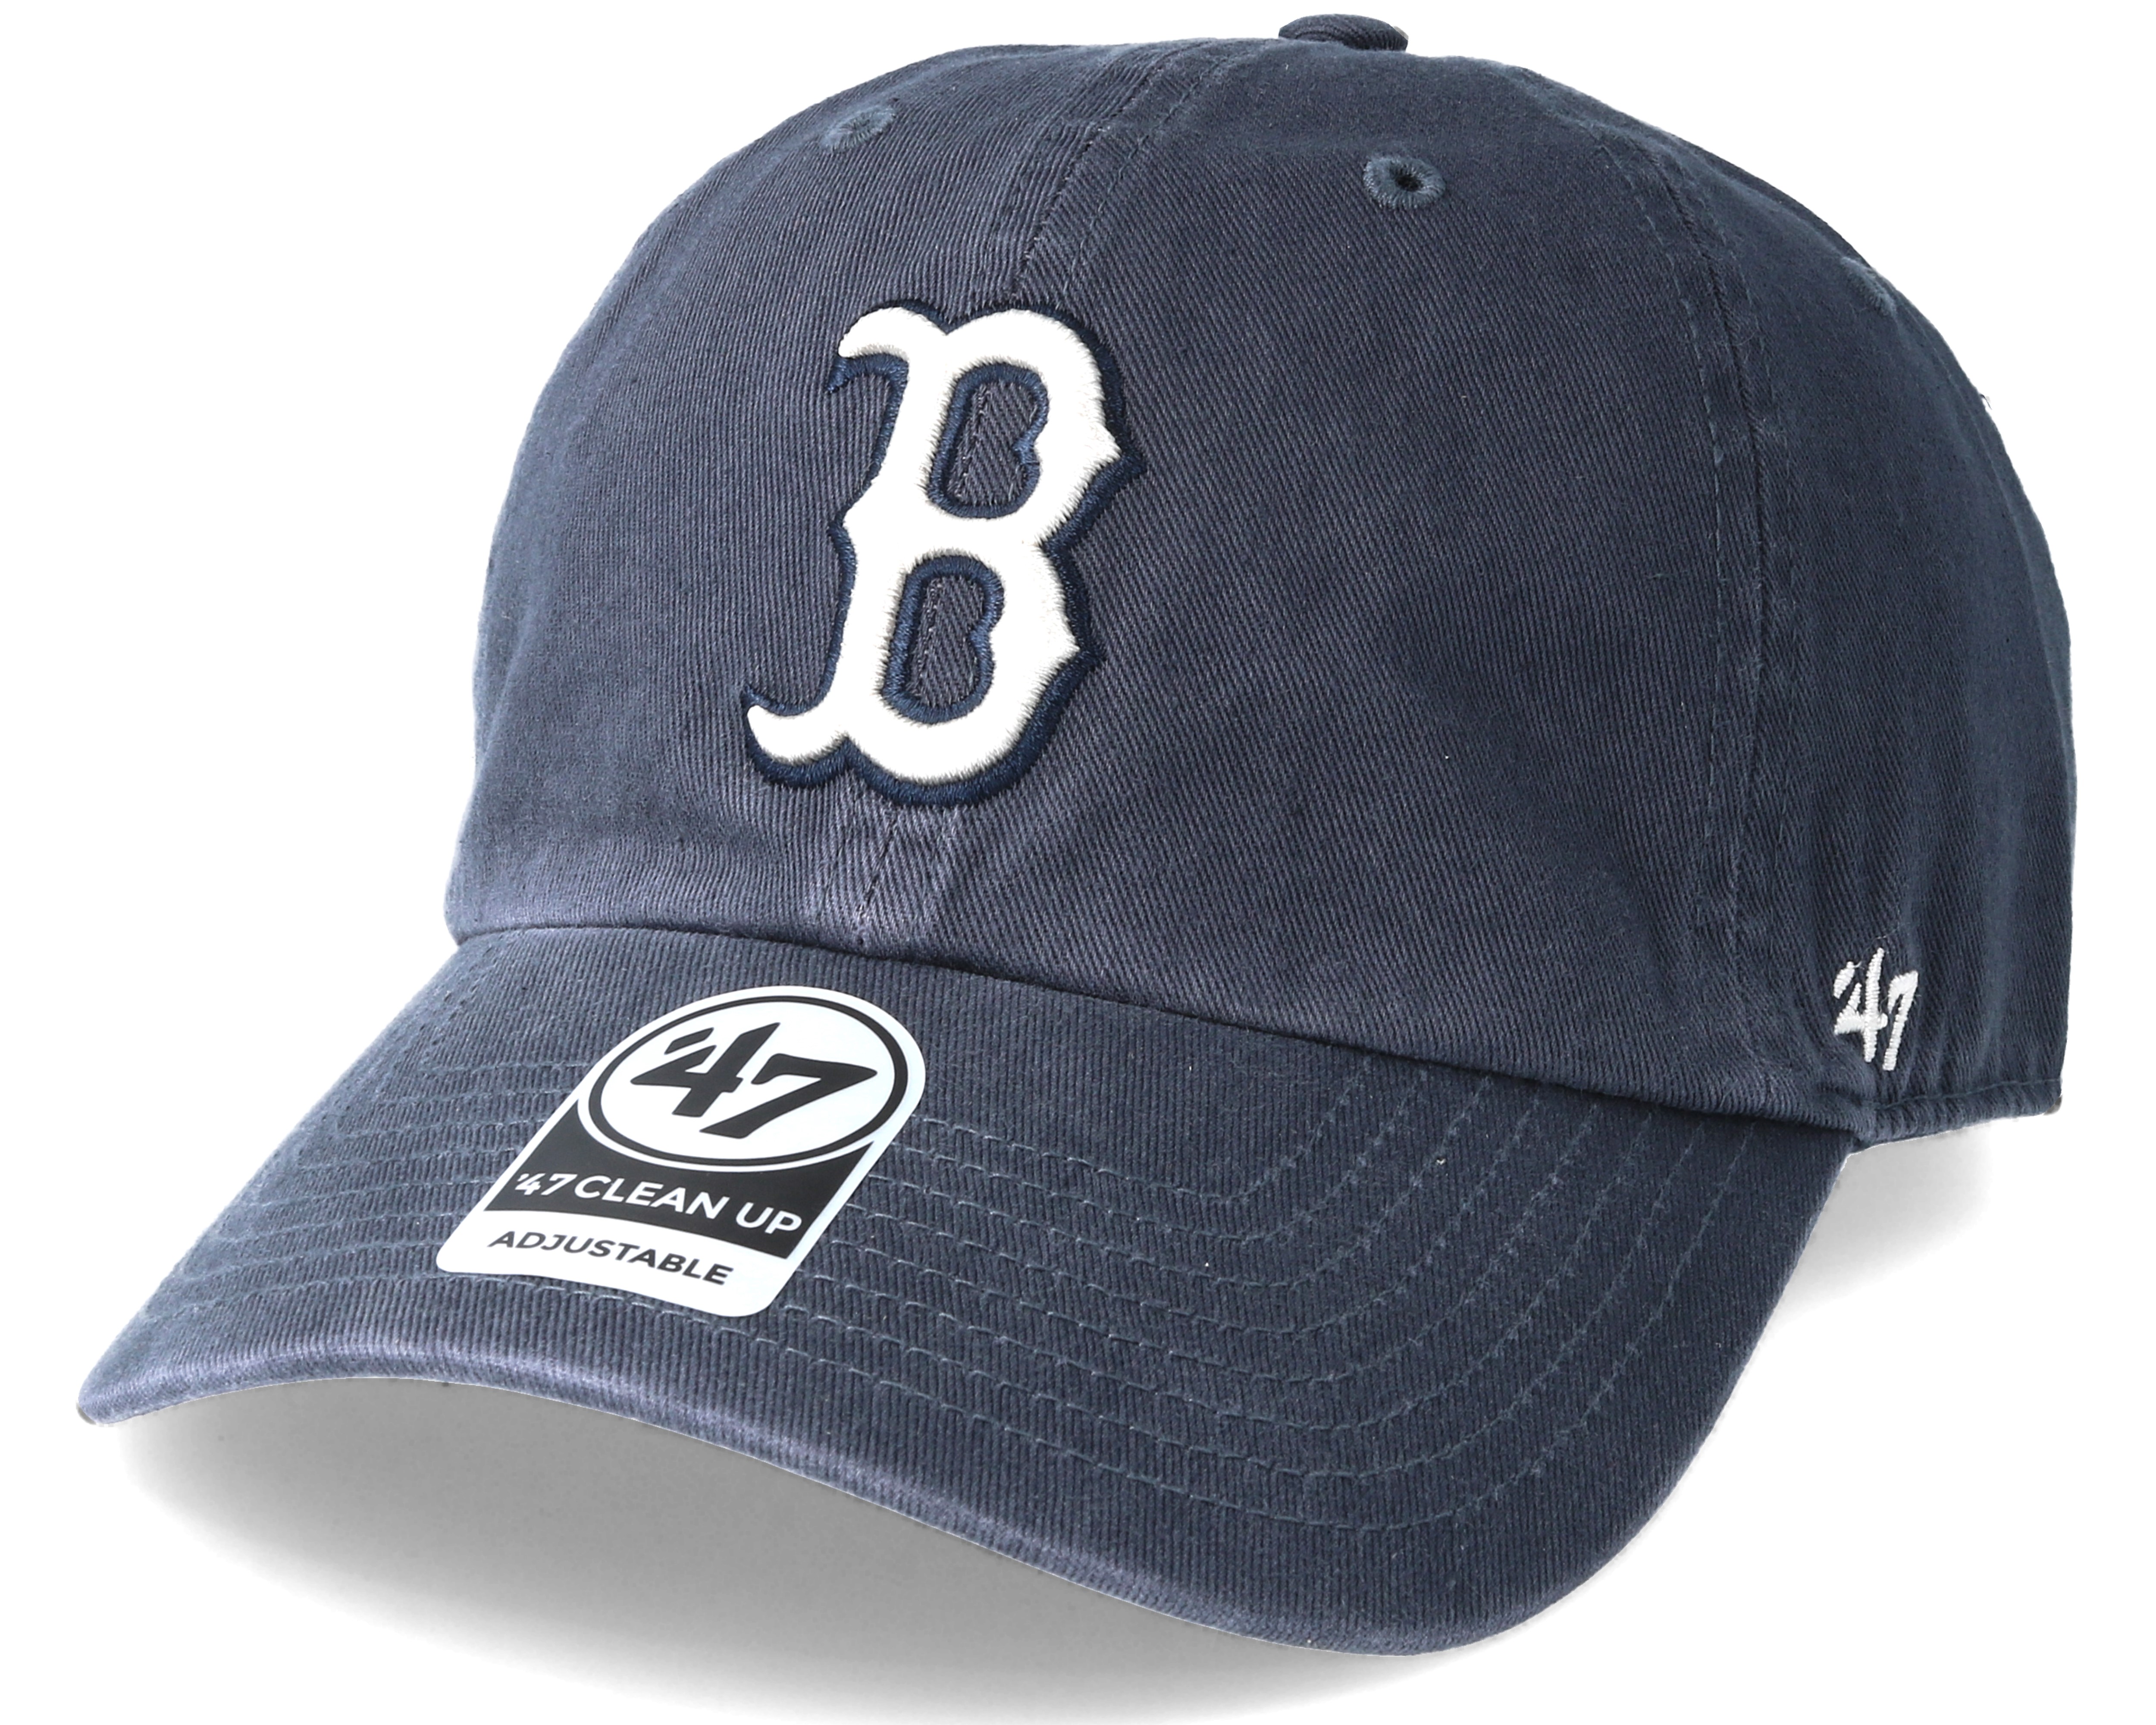 AXIS Boston Red Sox navy 47 Brand Adjustable Cap 